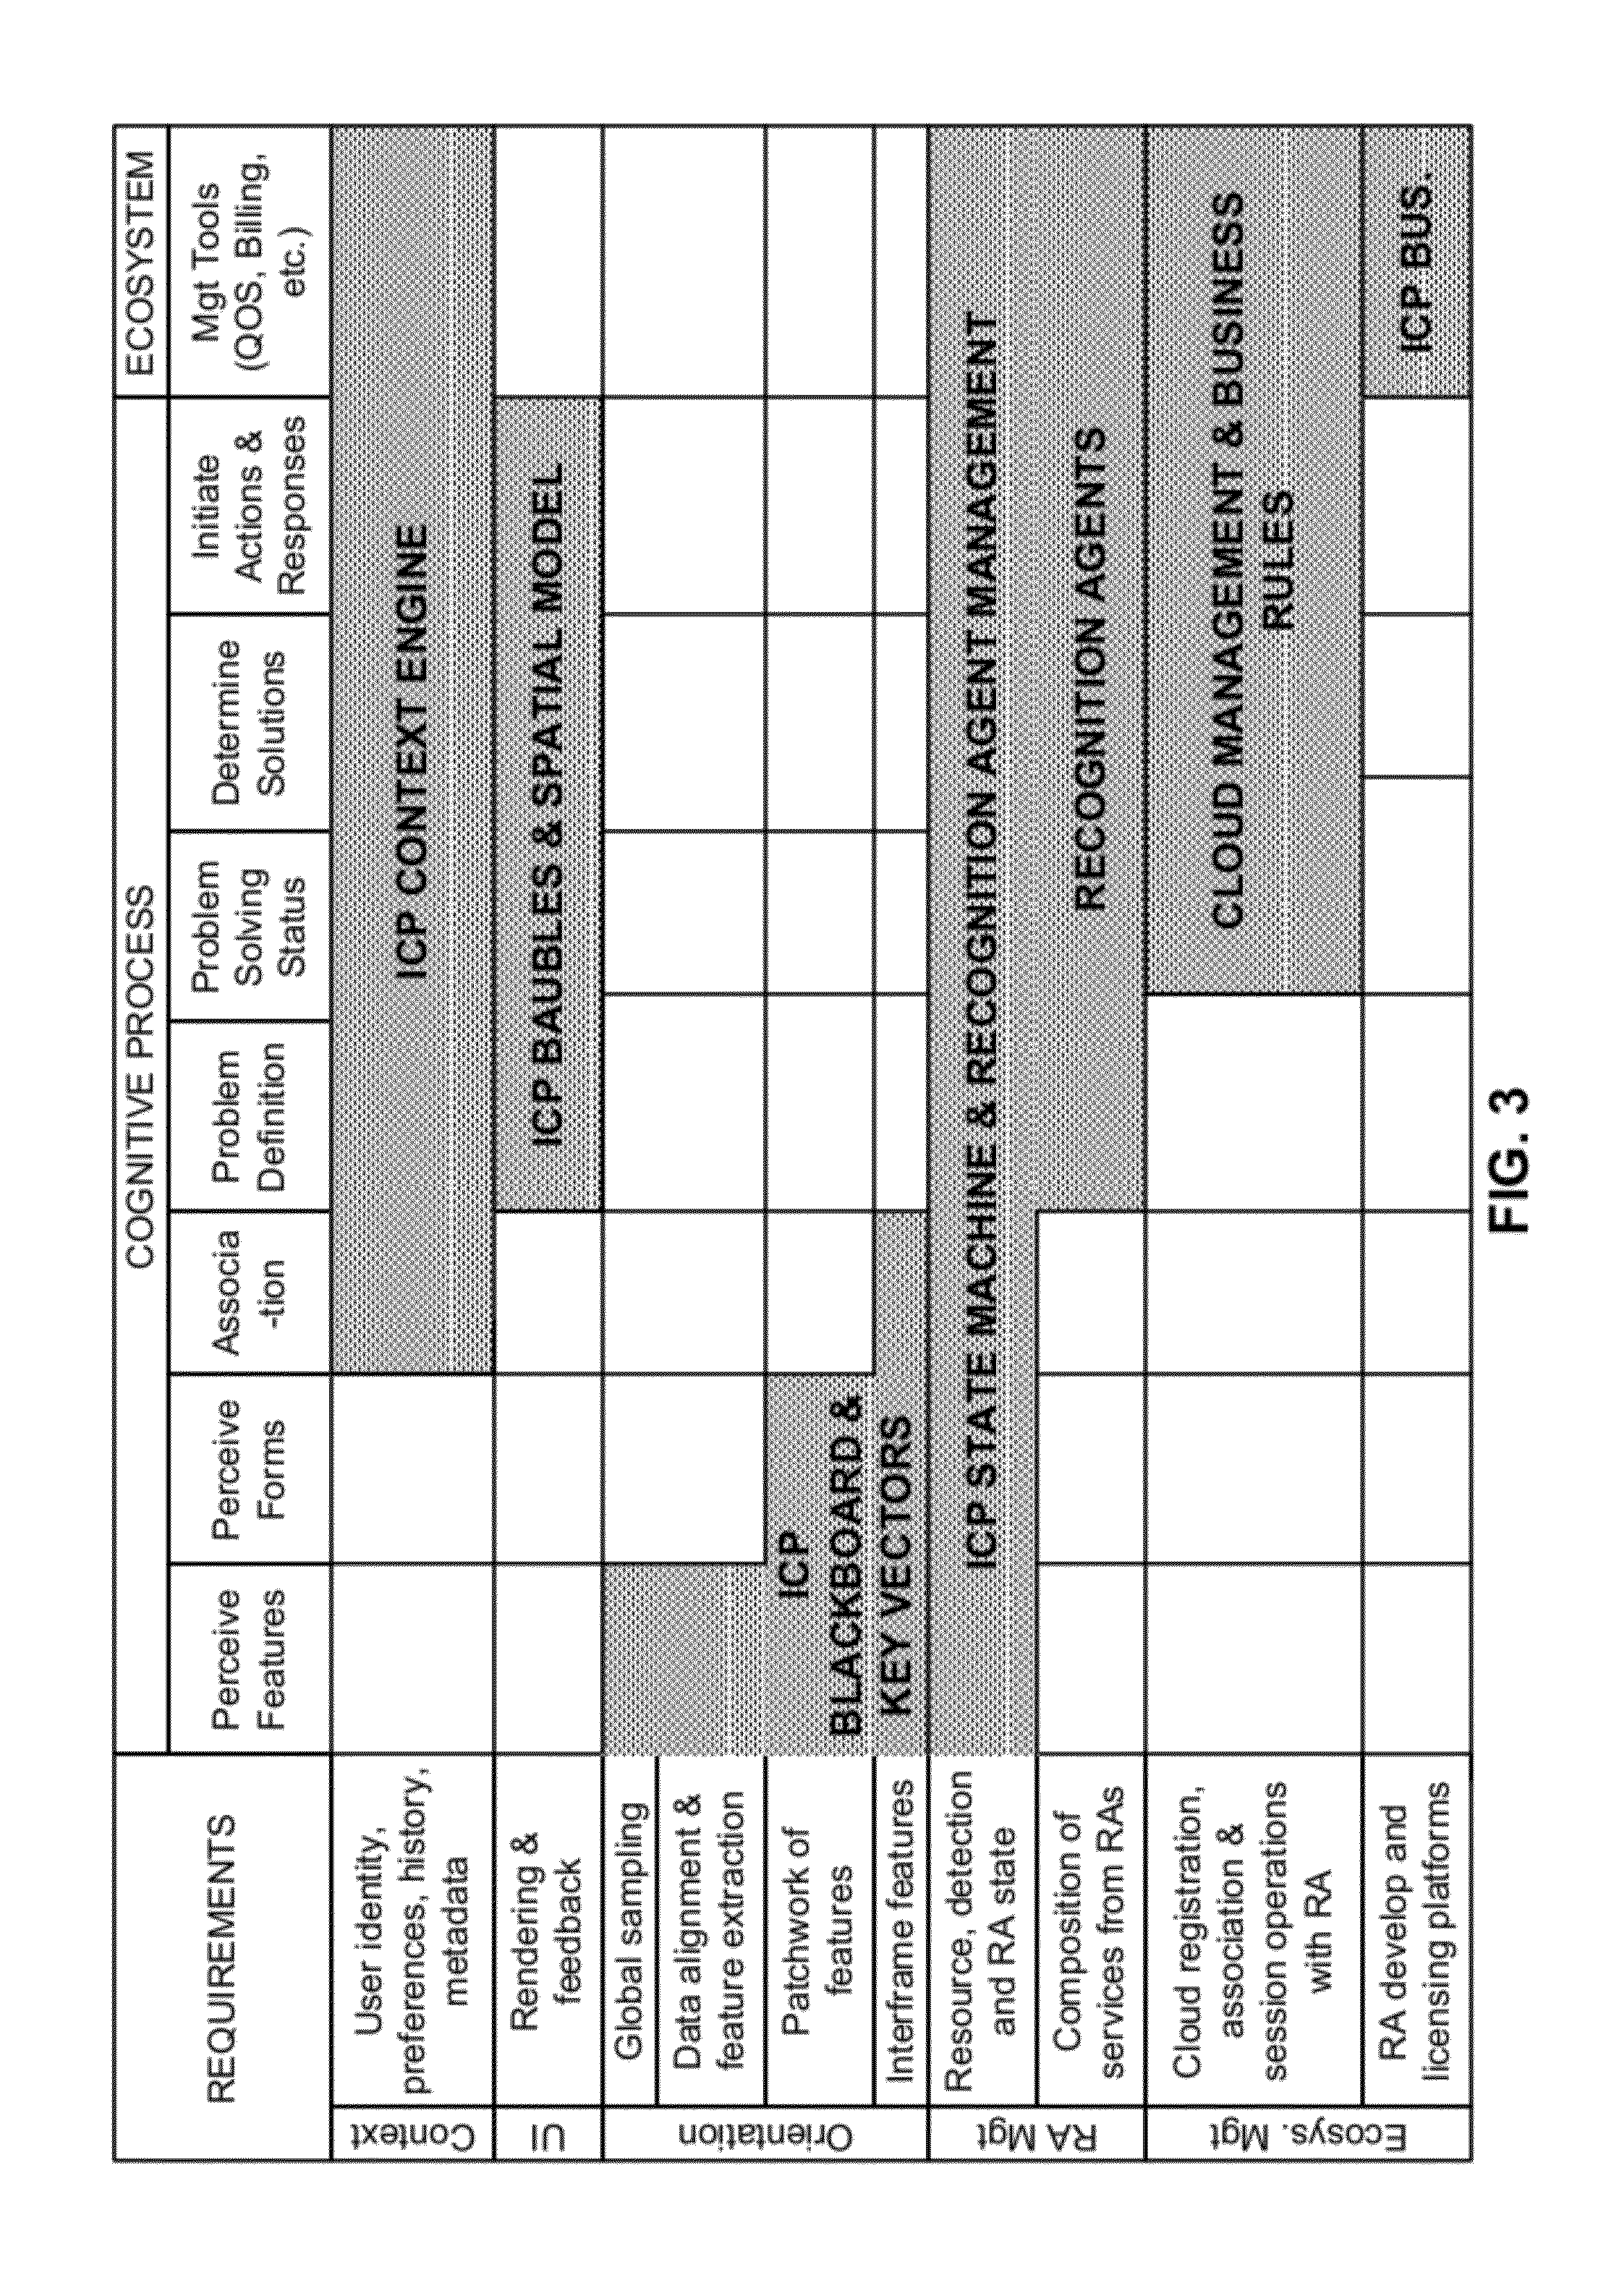 Sensor-based mobile search, related methods and systems